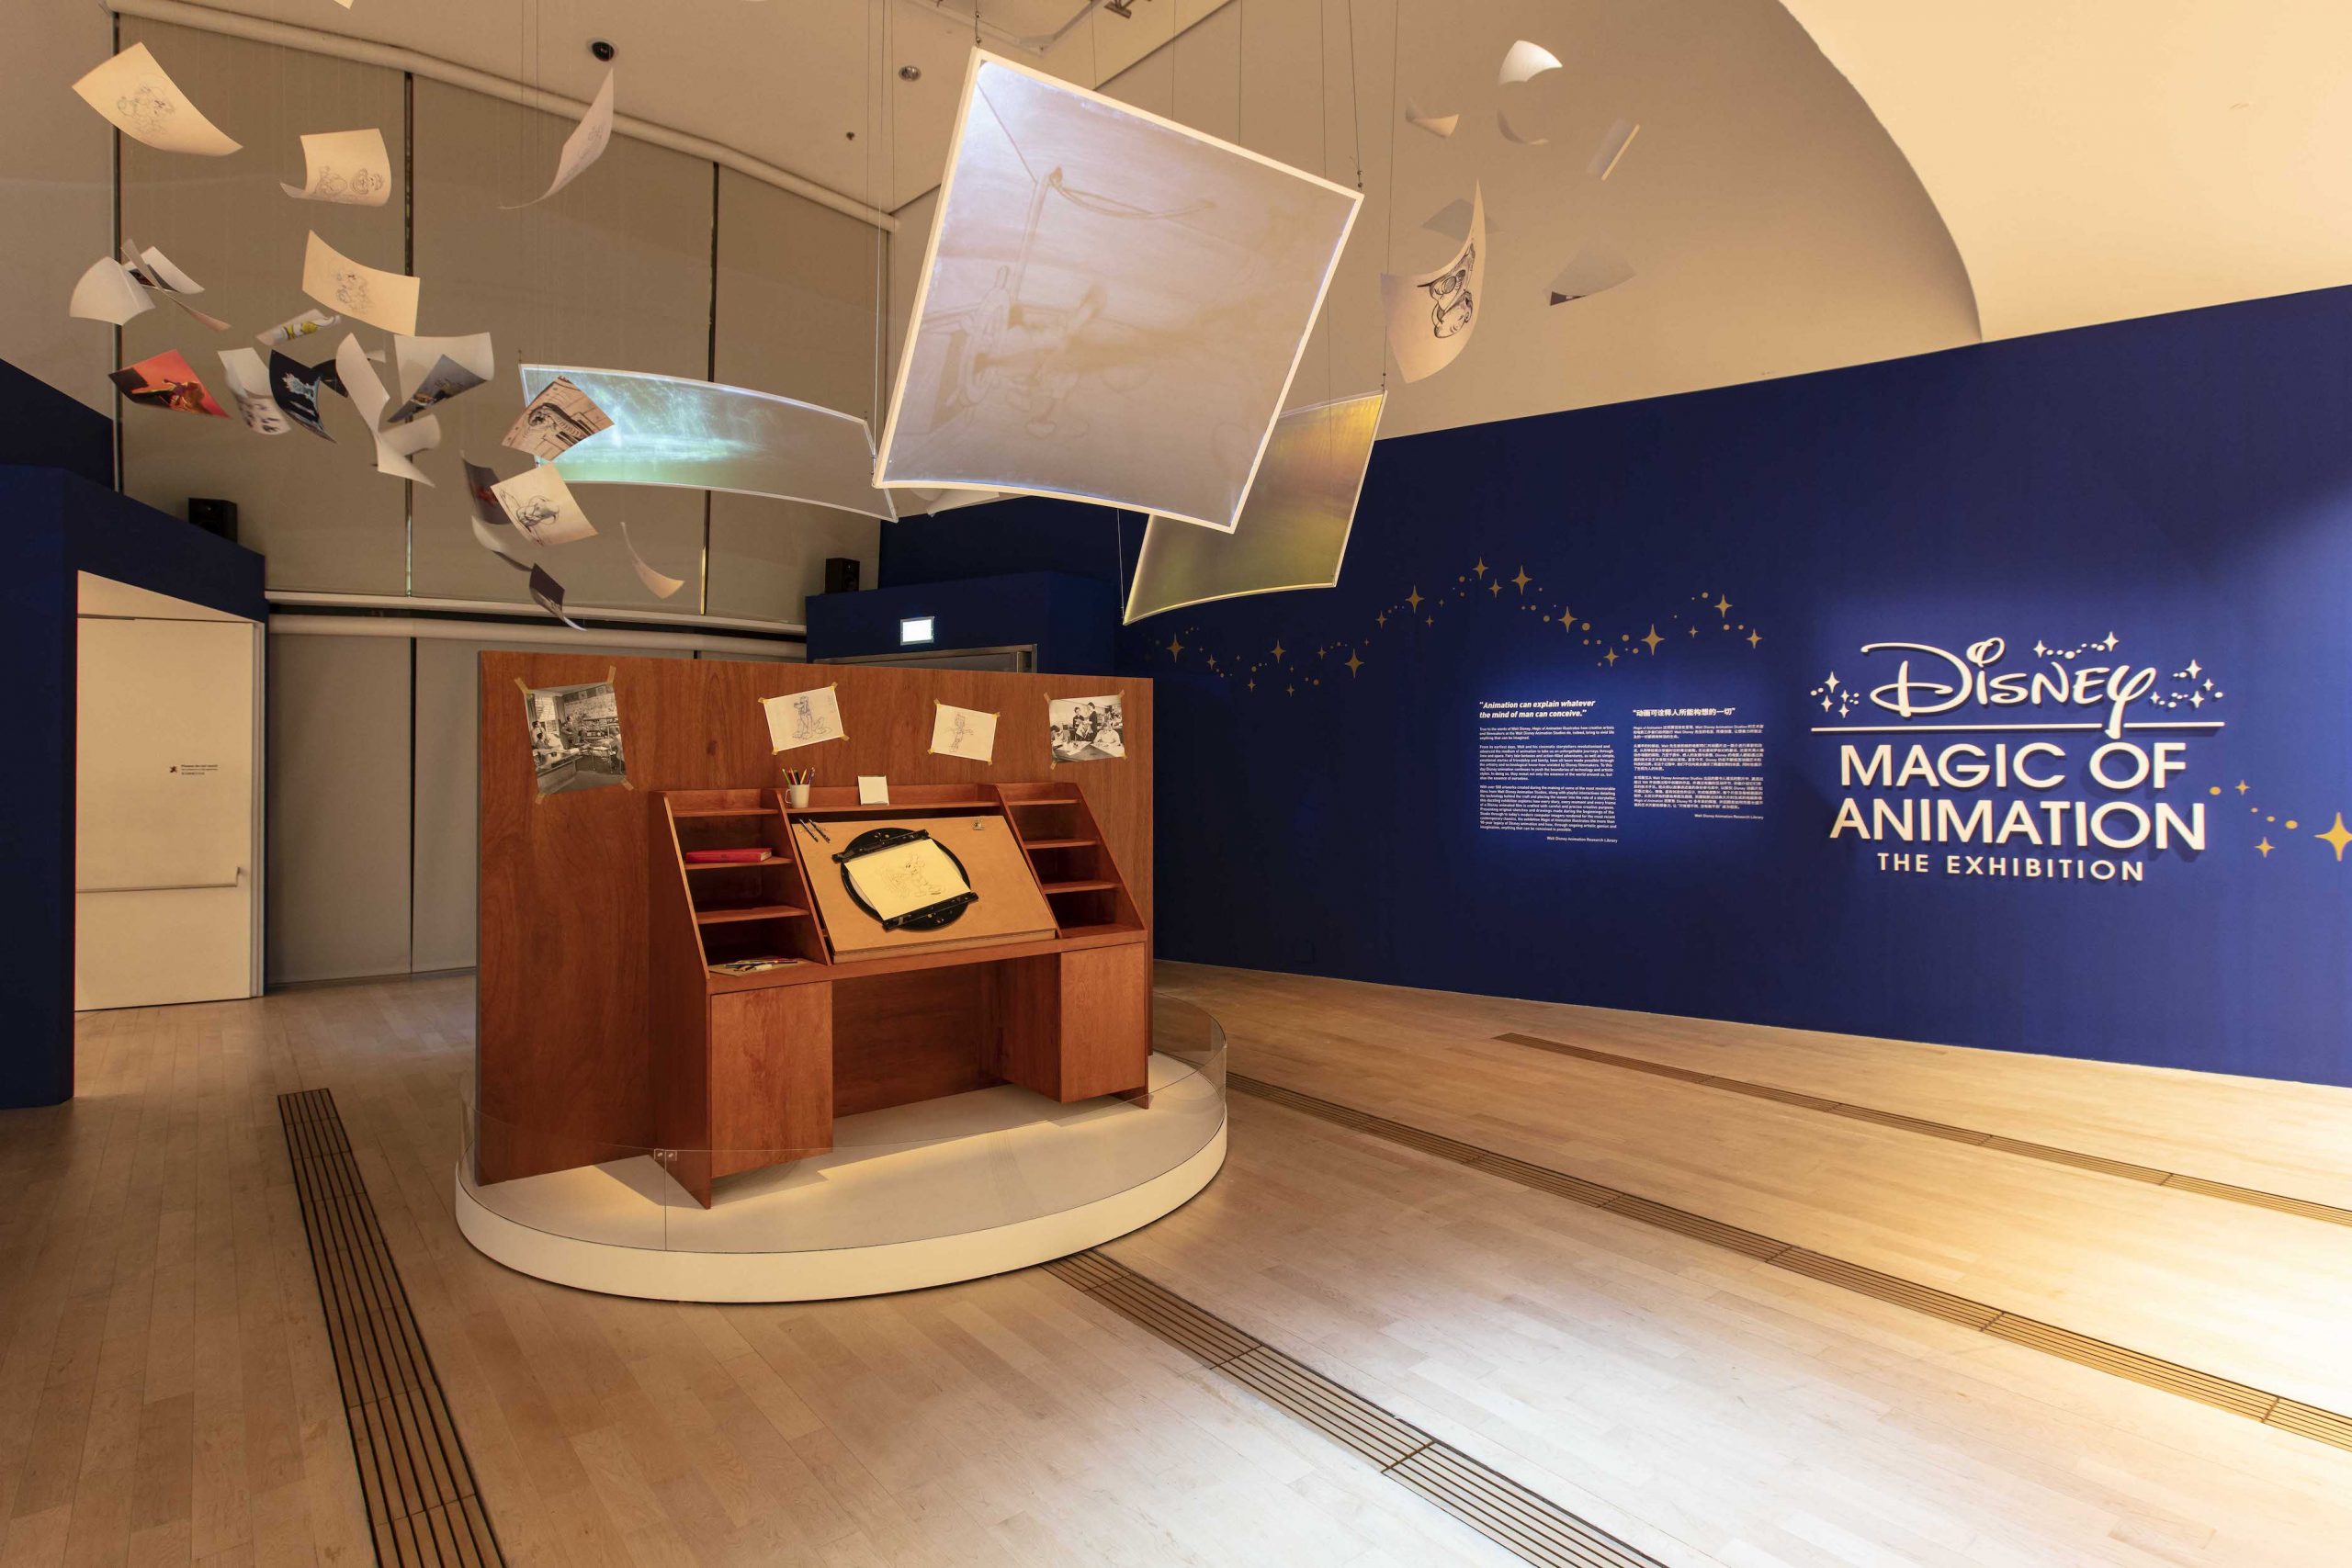 Replica of Disney's animator's desk at the entrance of Disney Magic of  Animation (Credit to Marina Bay Sands and Disney) | Food For Thought | Food  For Thought